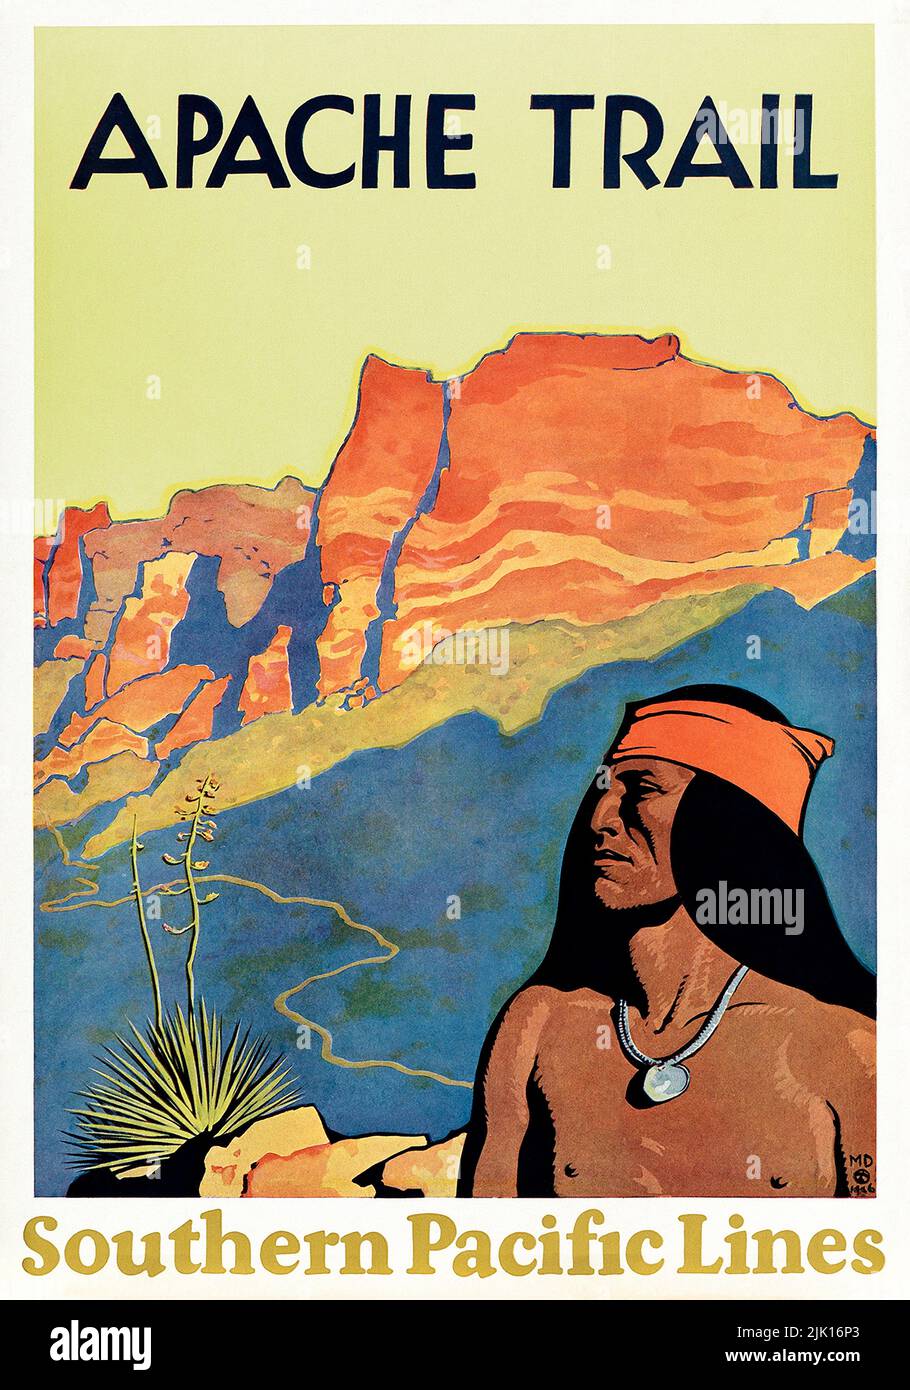 Vintage 1920s Rail Poster - APACHE TRAIL / SOUTHERN PACIFIC LINES. 1928. Stock Photo